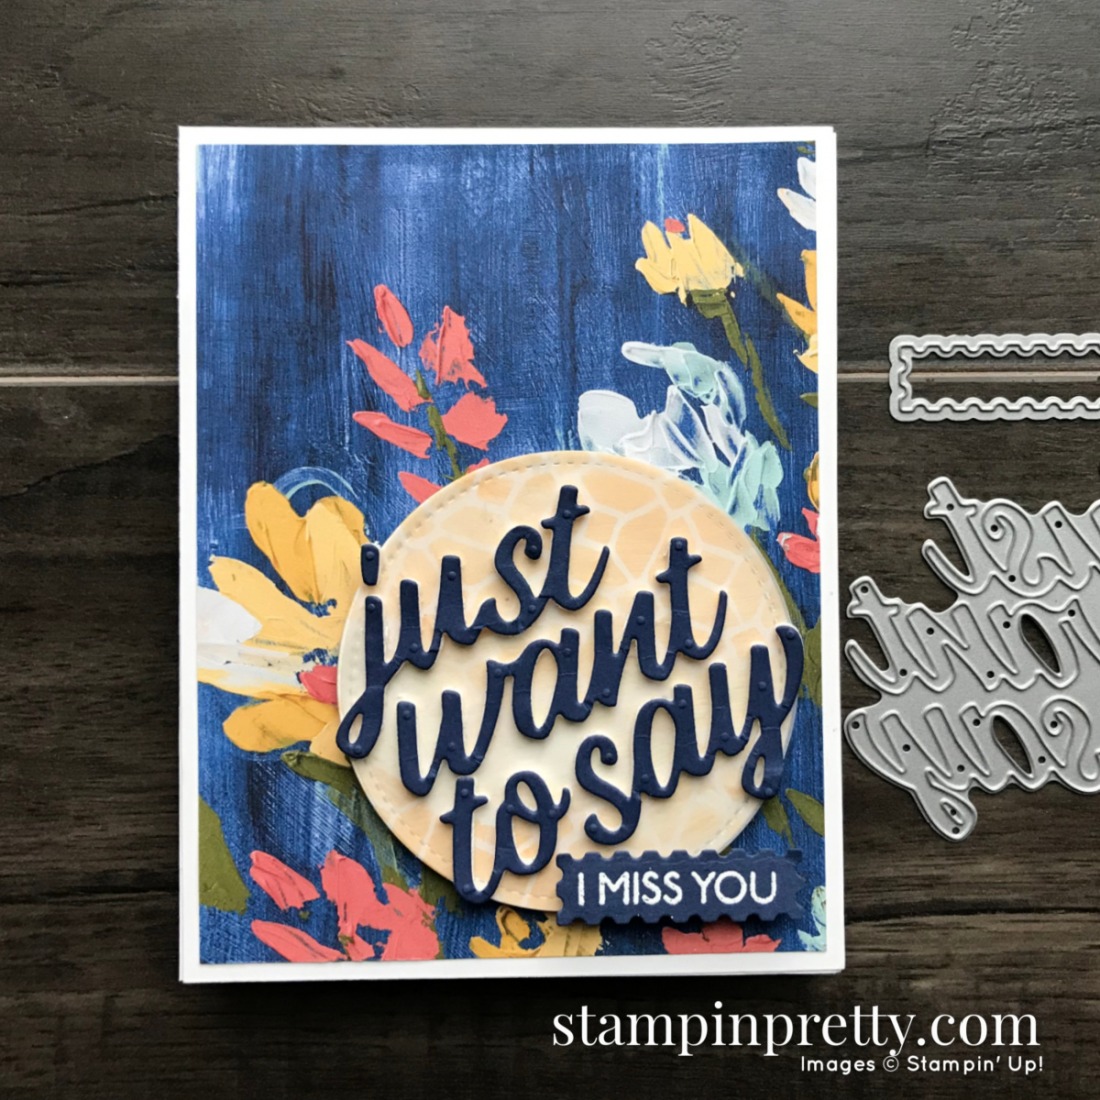 Sneak Peek! Fine Art Floral Suite from Stampin' Up! Card by Mary Fish, Stampin' Pretty